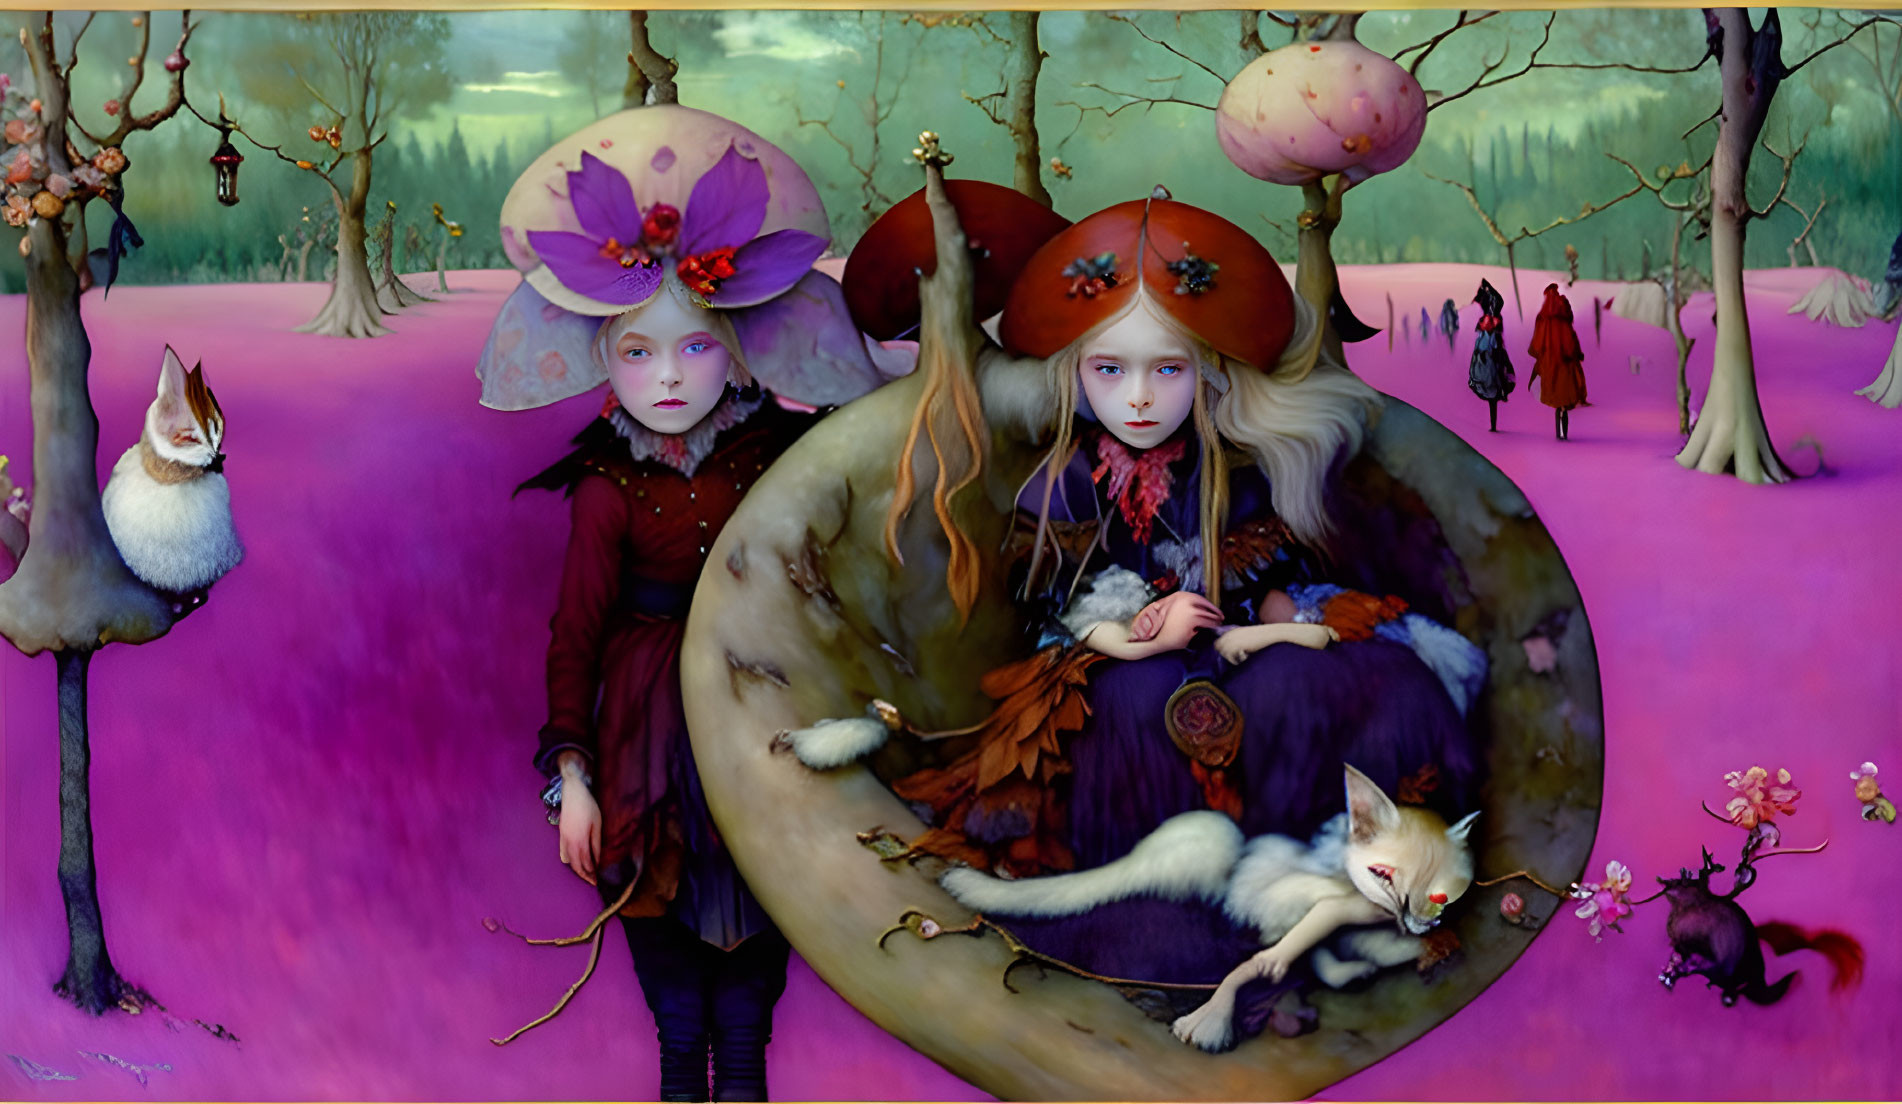 Surreal Artwork: Two Pale Girls with Mushroom Hats in Purple Landscape